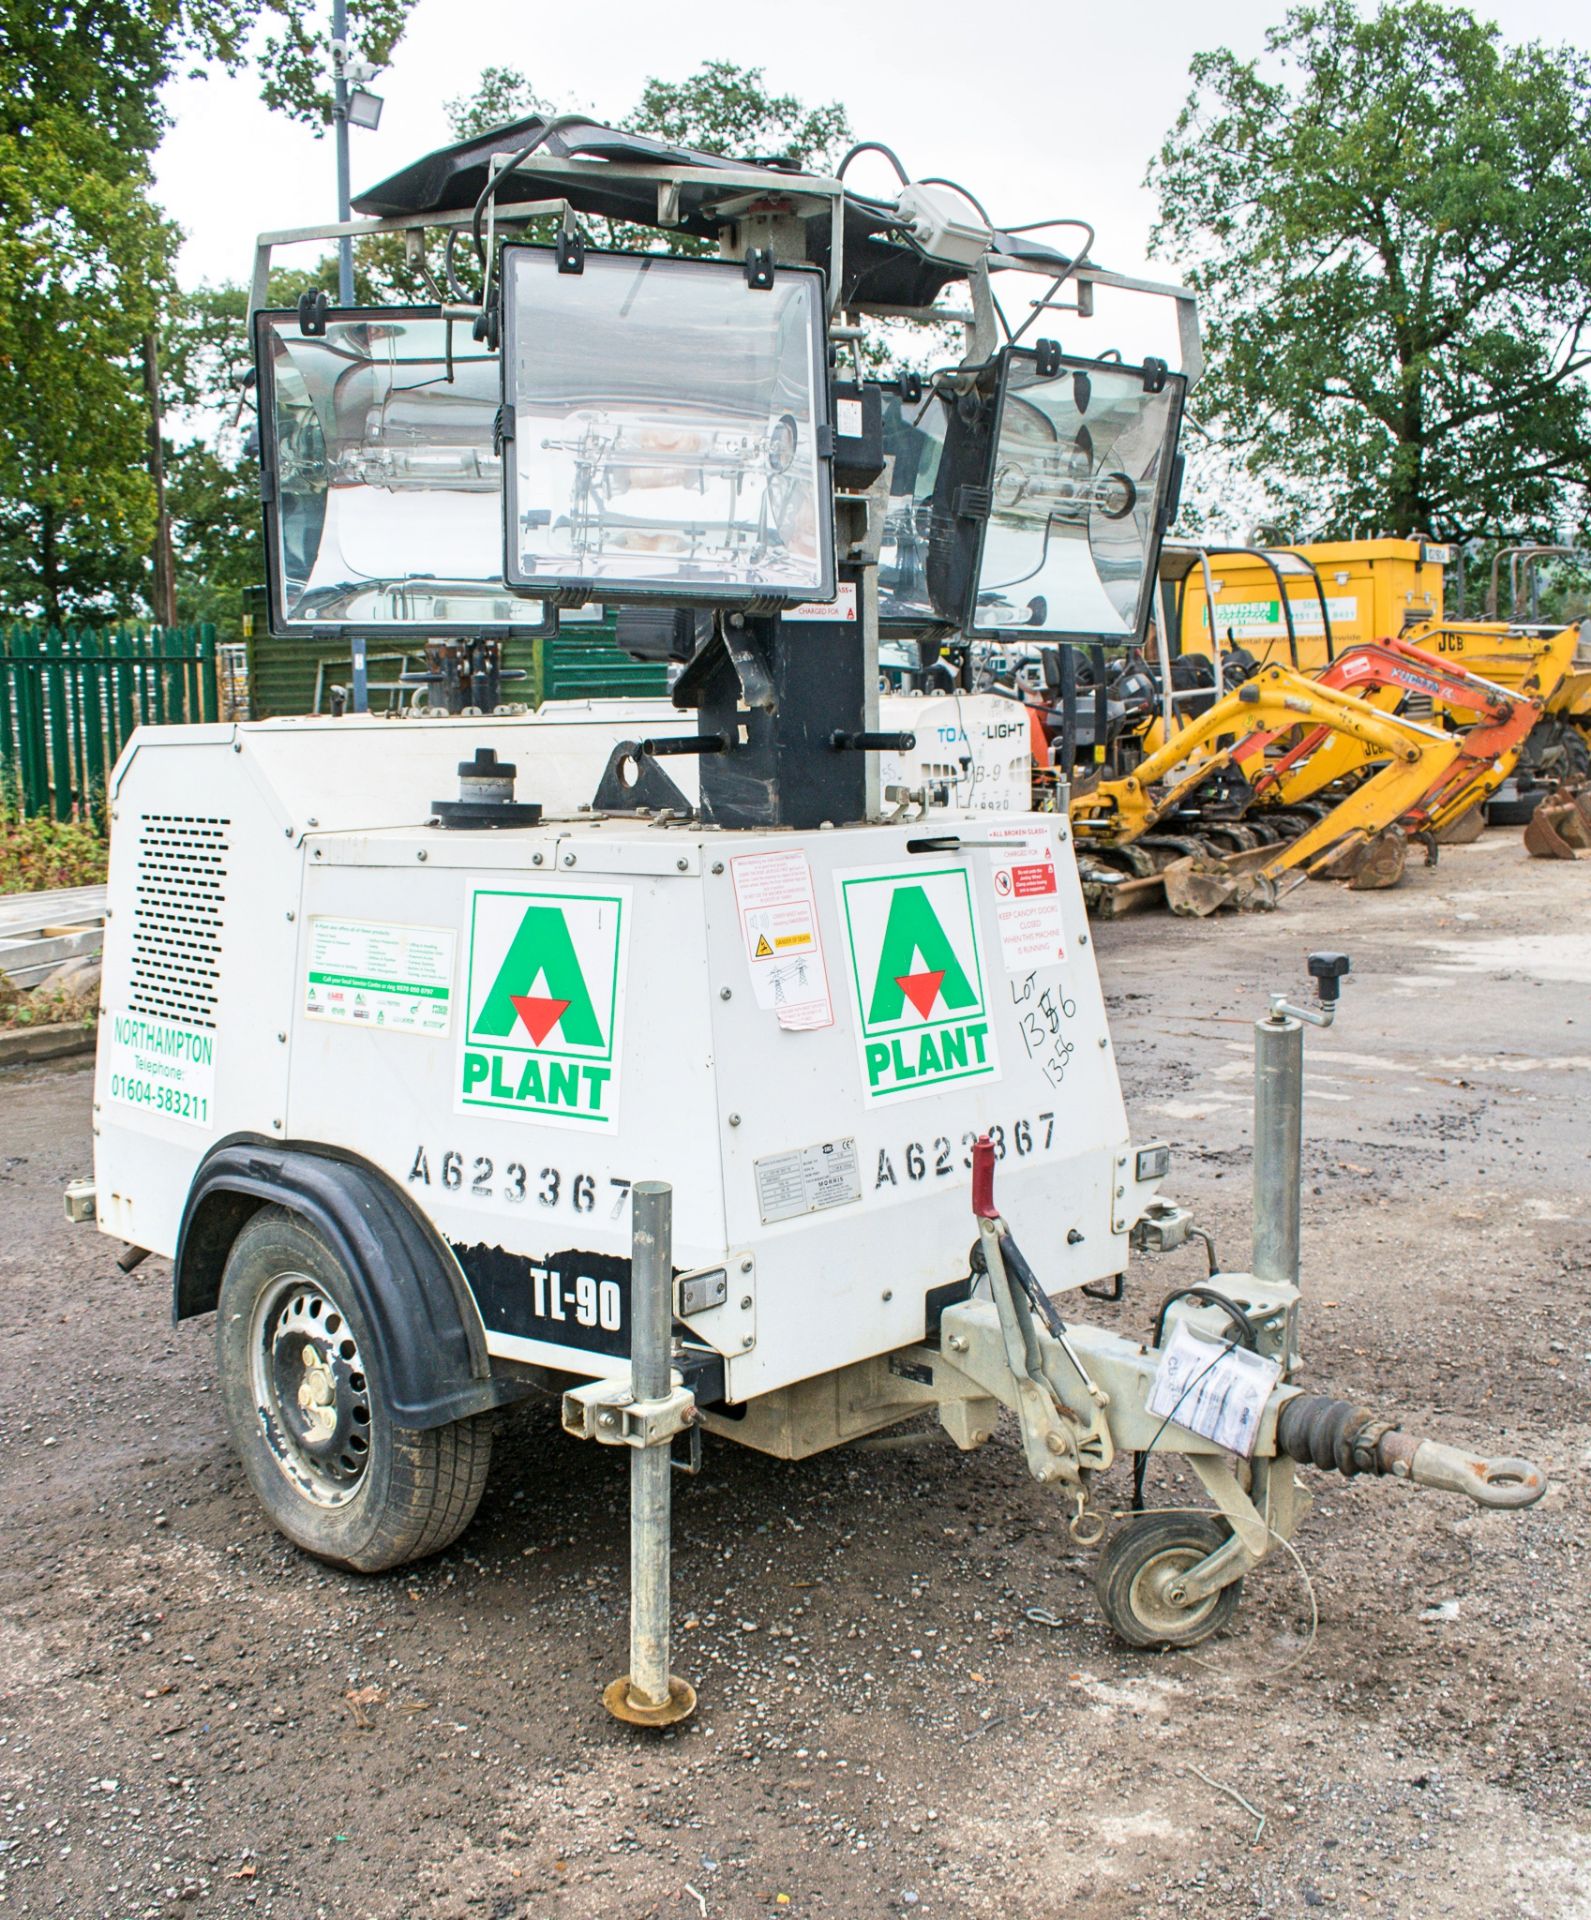 SMC TL-90 diesel driven mobile lighting tower Year: 2013 S/N: 1310413 Recorded Hours: 2244 A623367